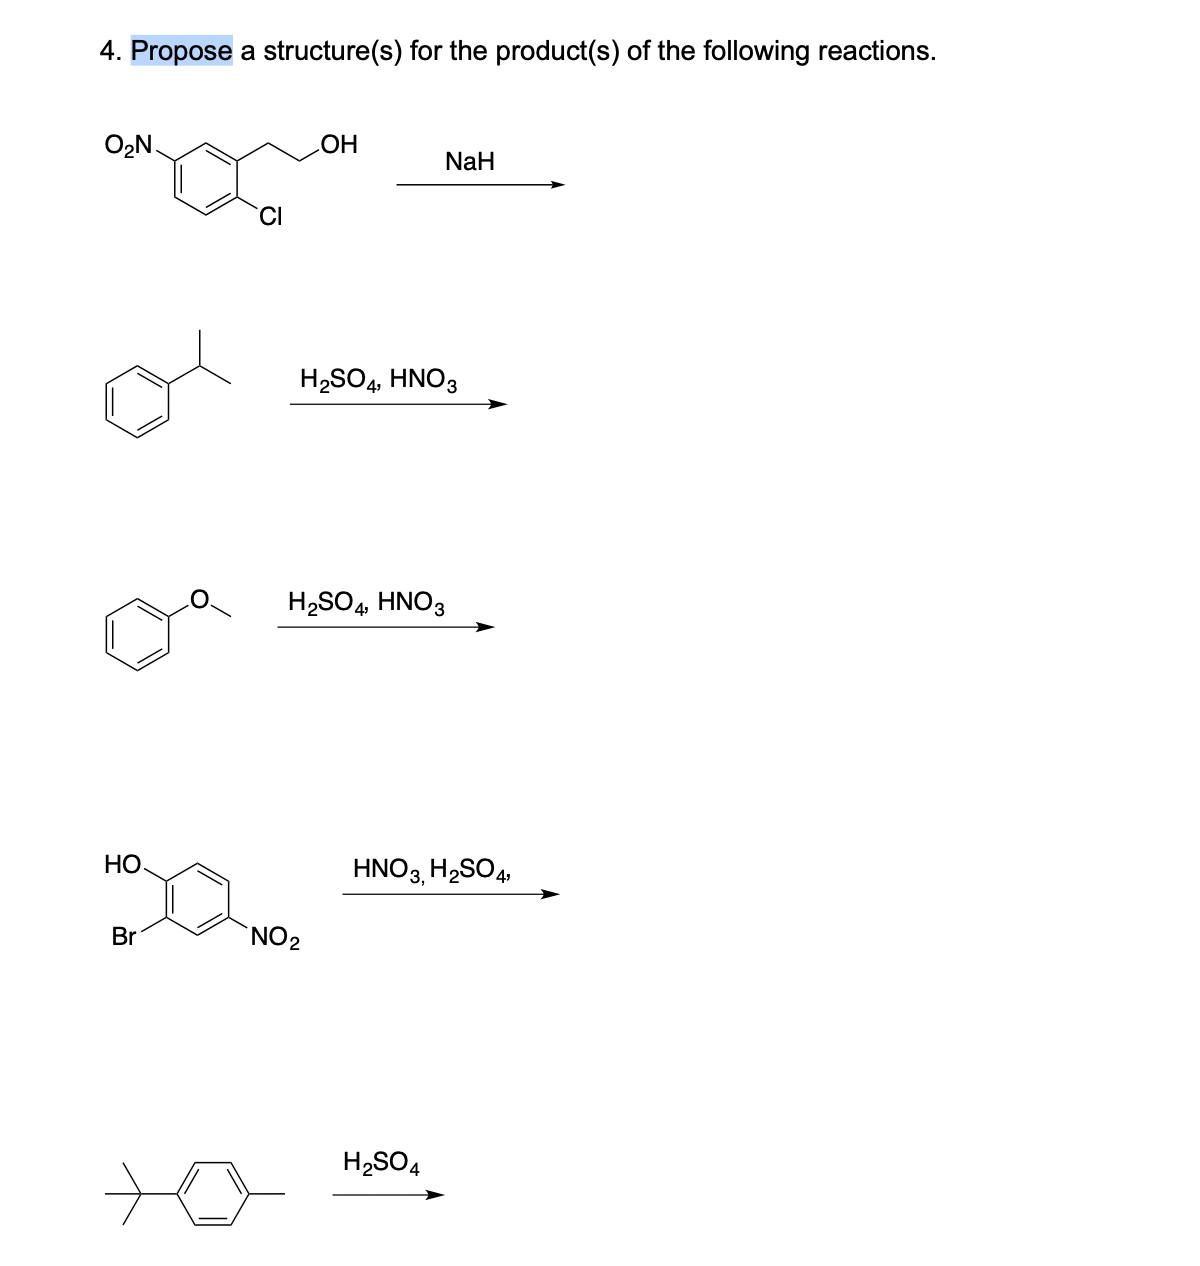 4. Propose a structure(s) for the product(s) of the following reactions.
O2N.
HO
NaH
of
H2SO4, HNO3
H2SO4, HNO3
НО
HNO3, H2SO4,
Br
NO2
H2SO4
